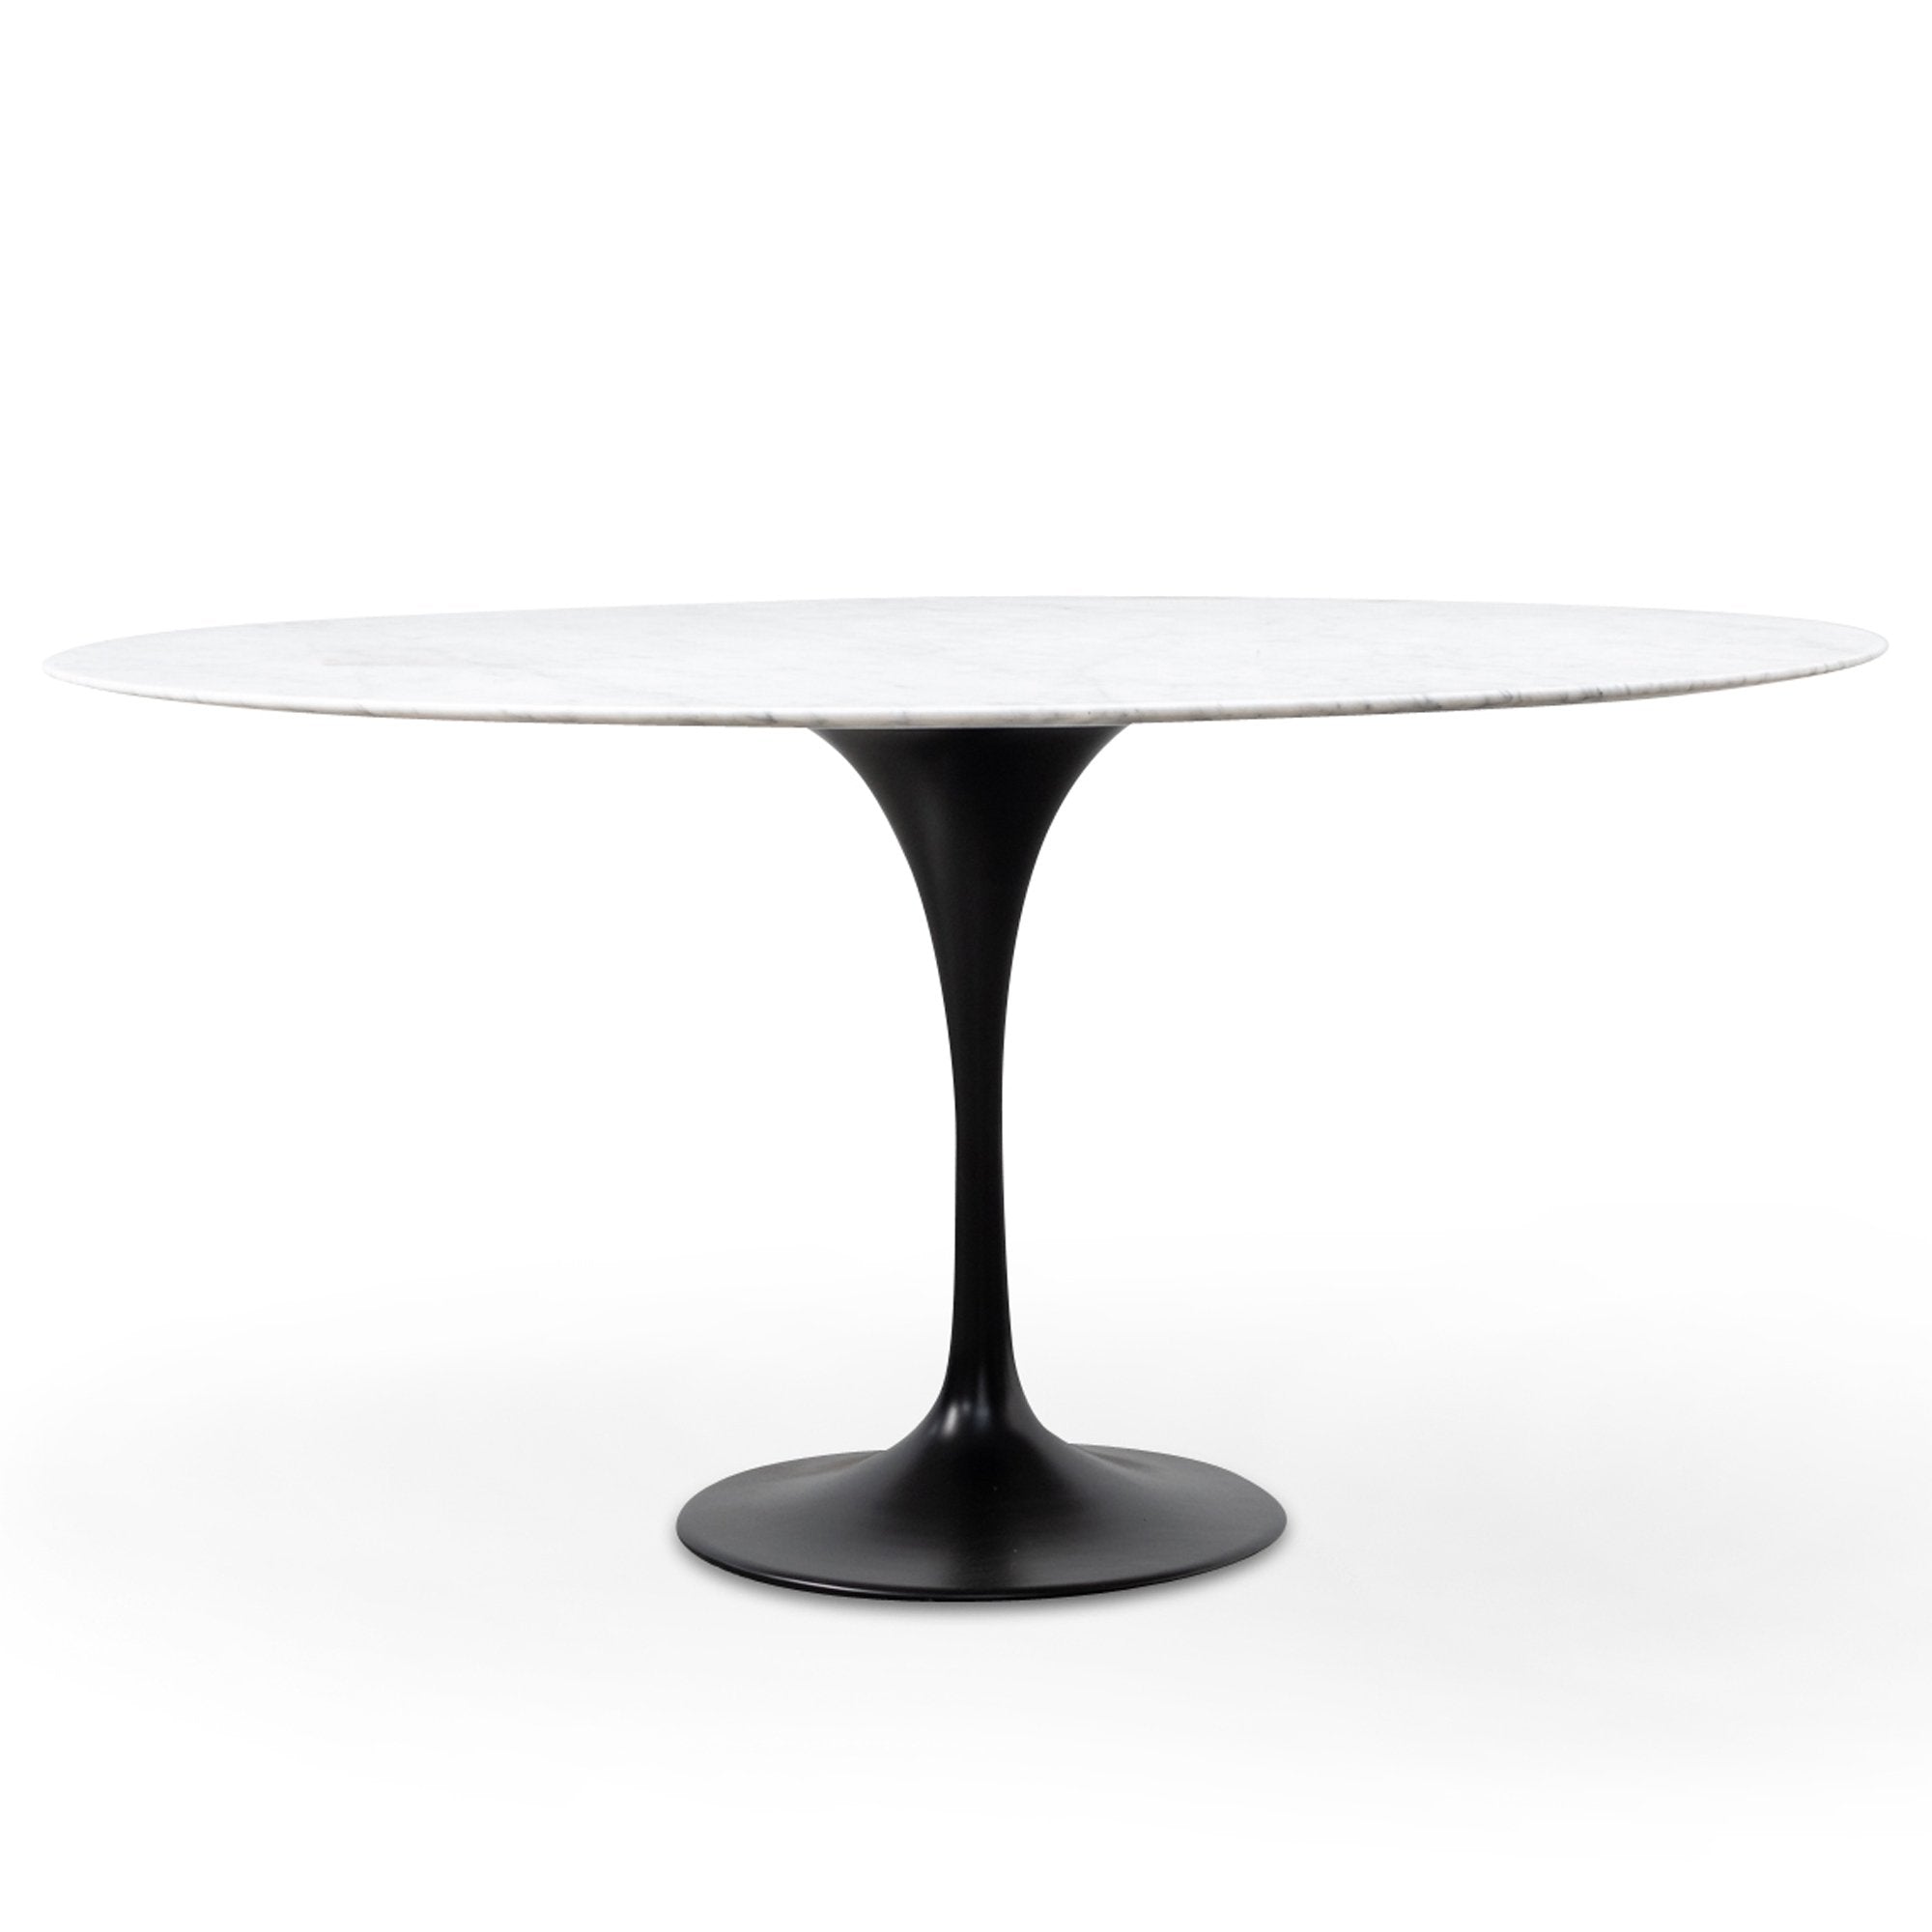 Baxter 1.5m - White Marble Round Dining Table - Black Base